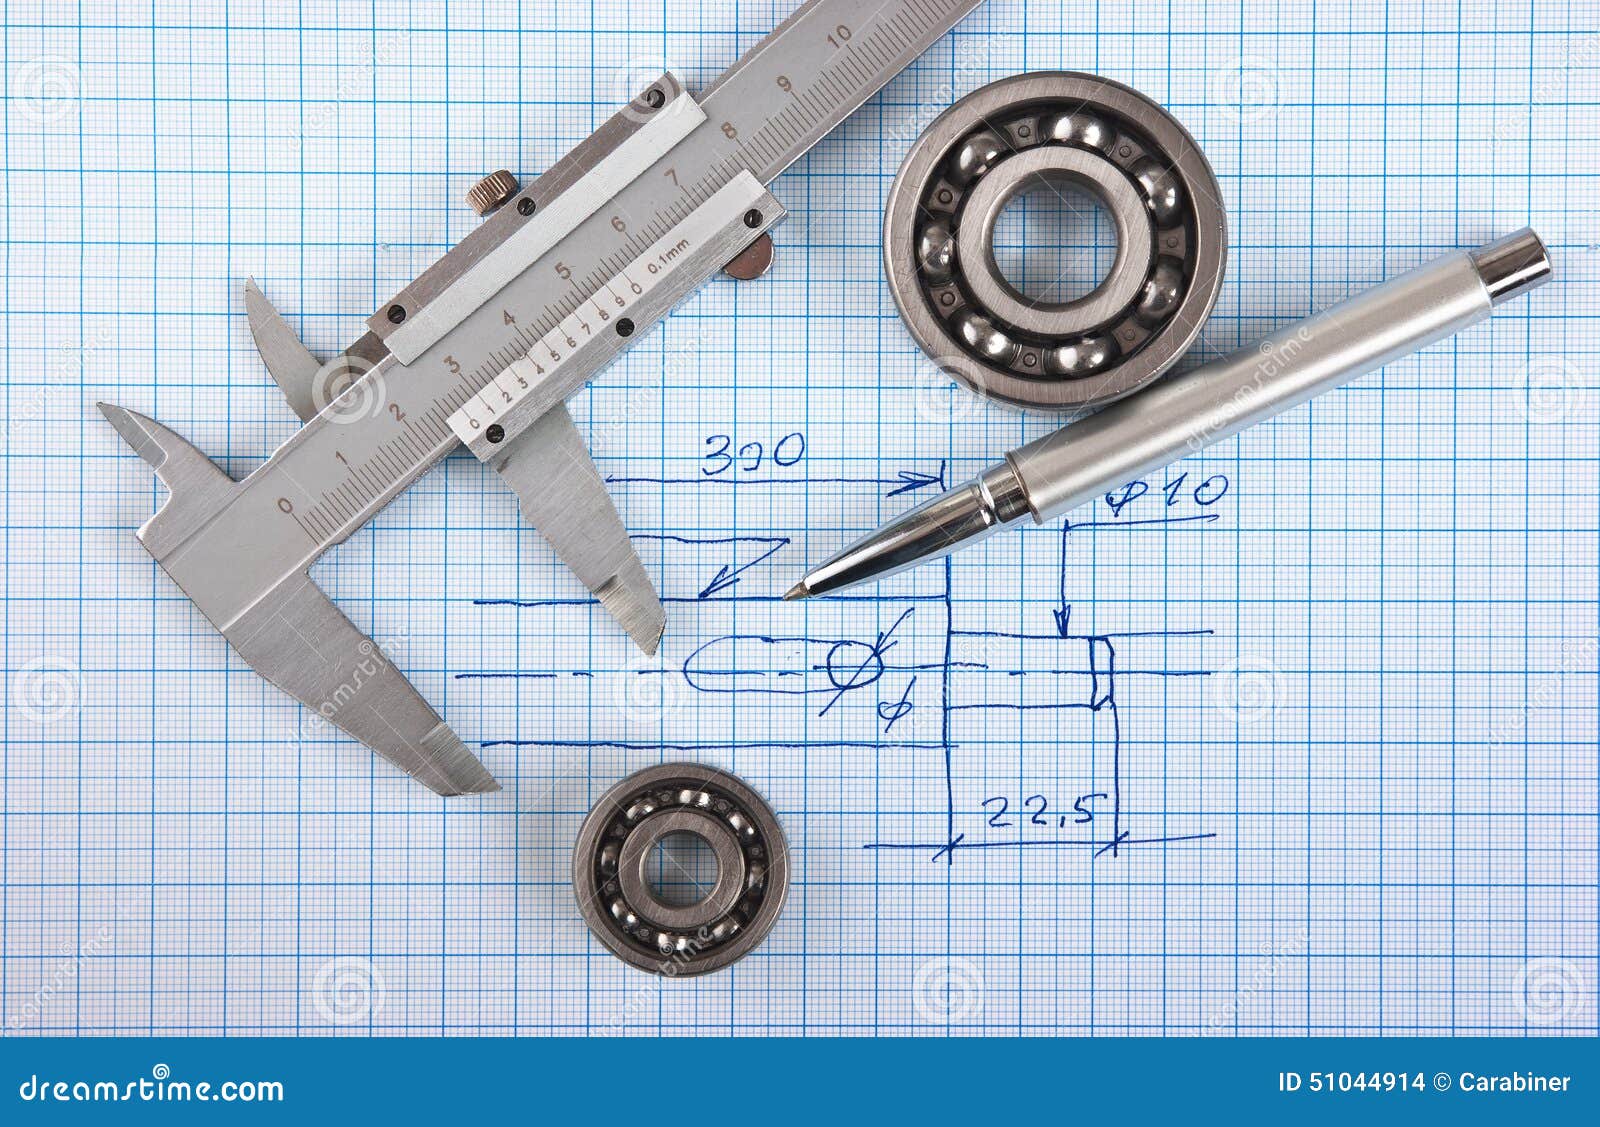 technical drawing and callipers